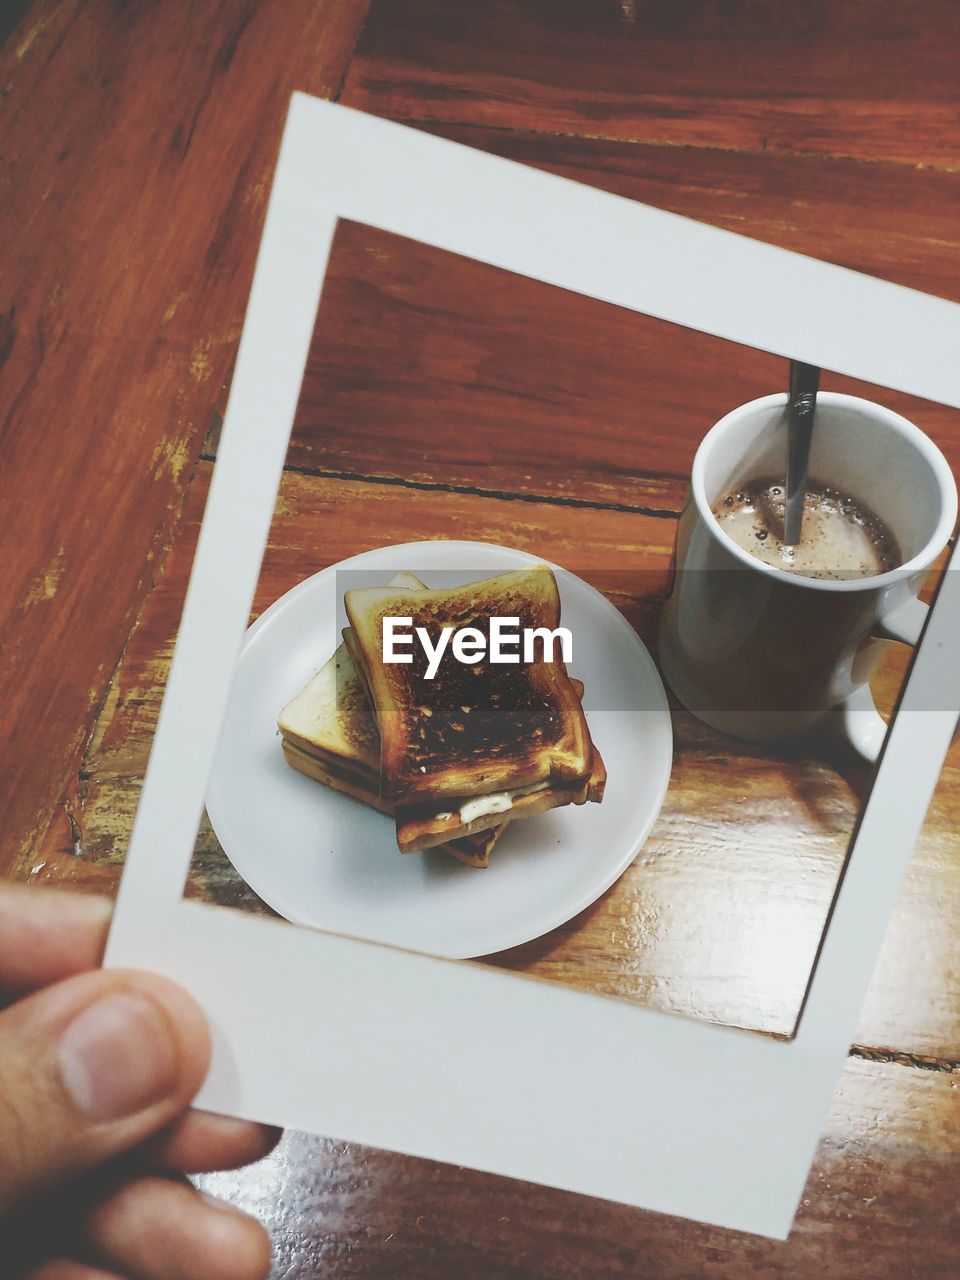 Cropped image of hand holding breakfast photograph against wooden table